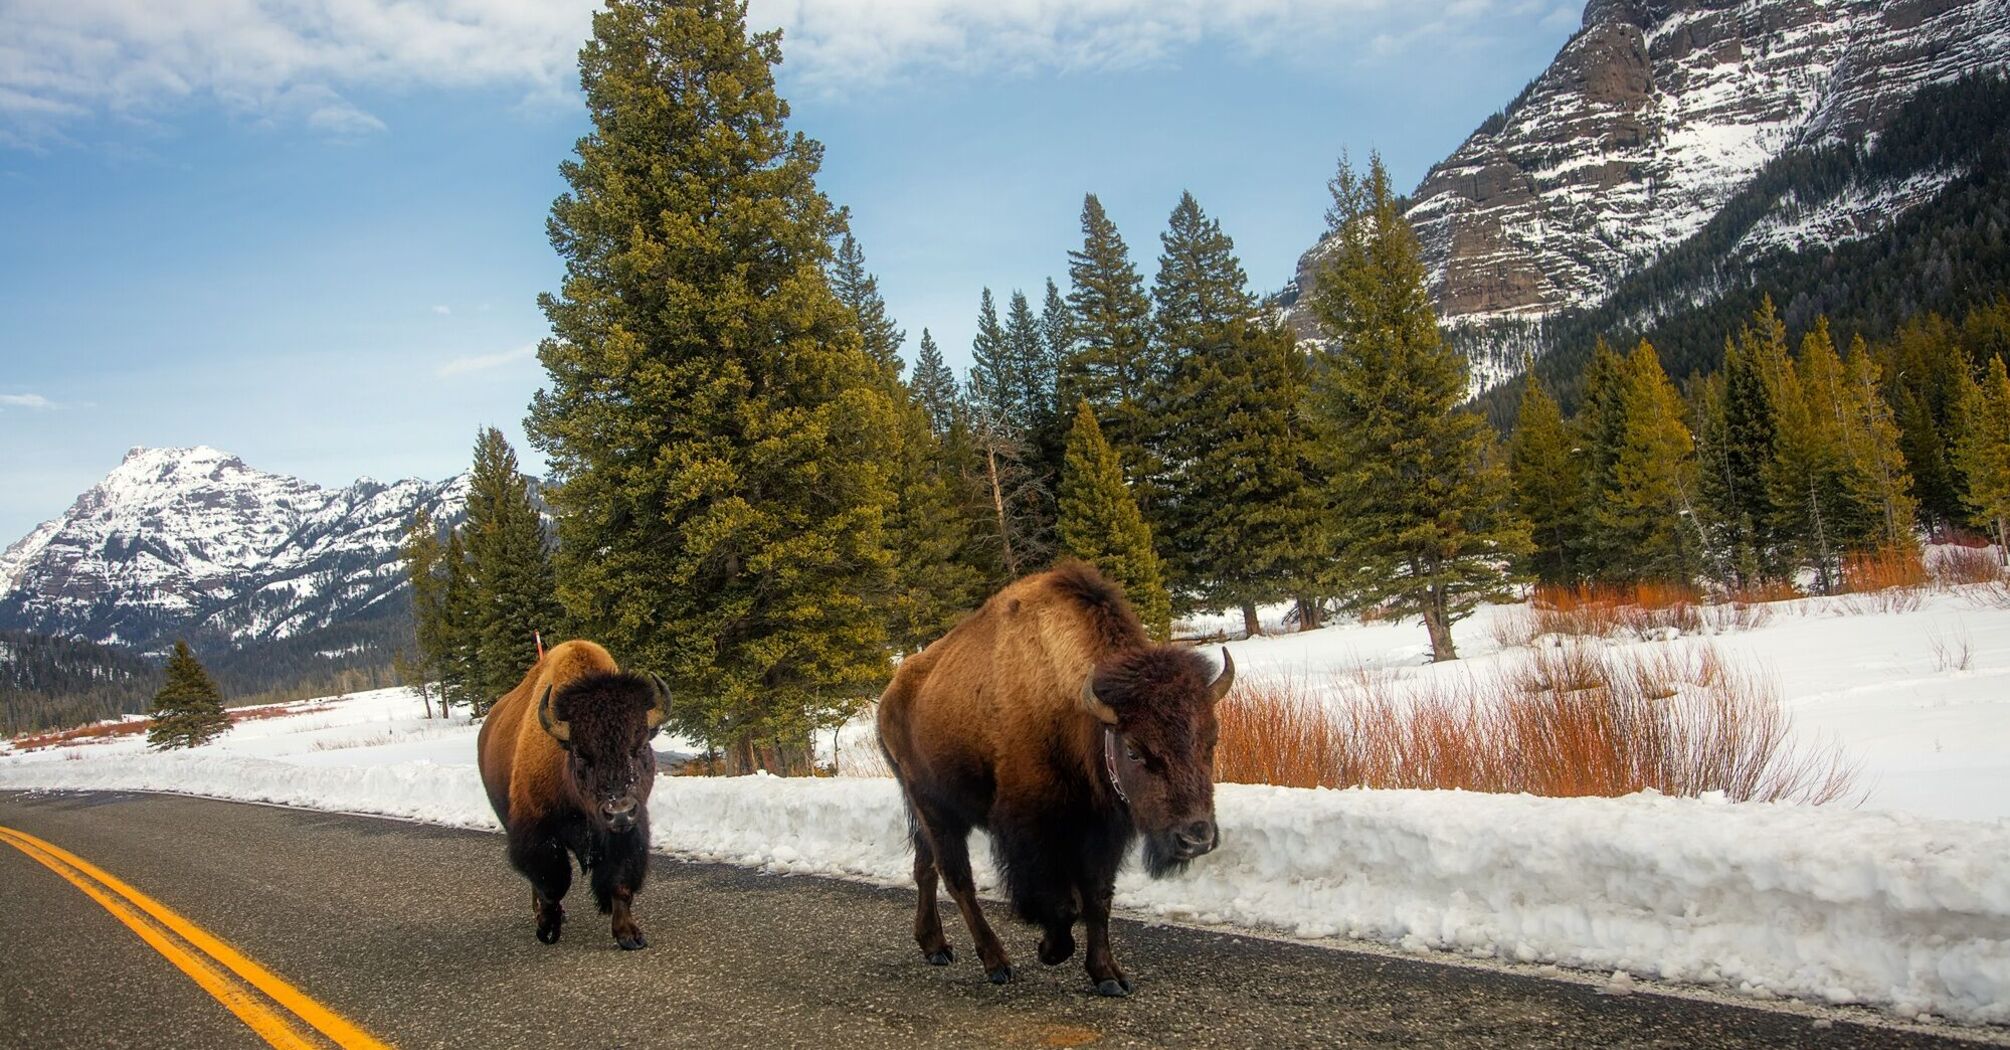 A bison attacks a car with a tourist at Yellowstone National Park